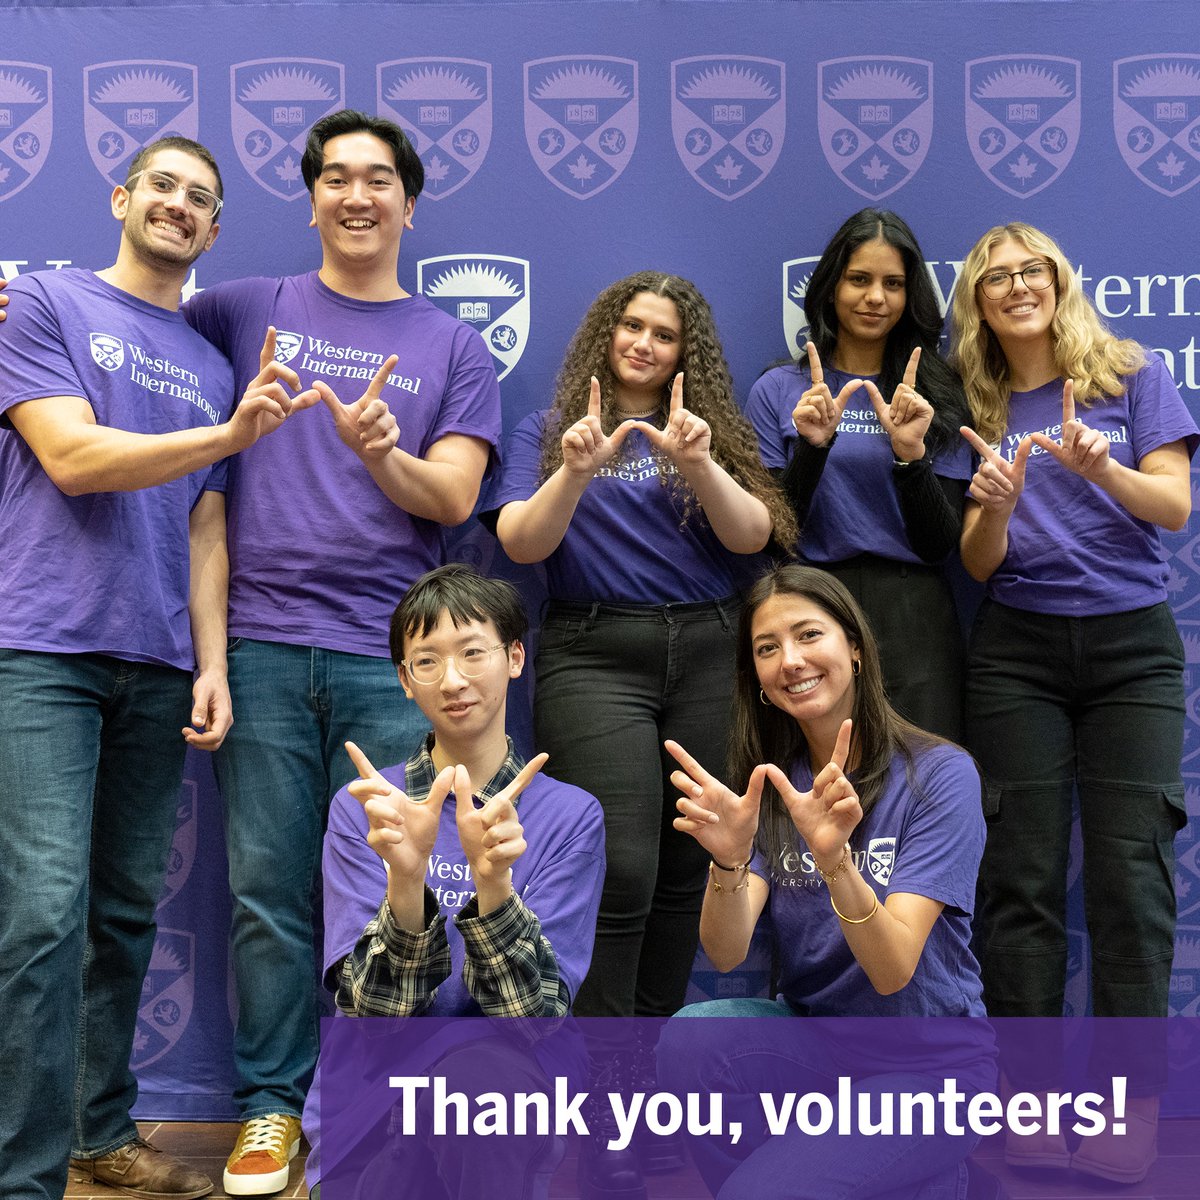 A huge thank you to our student volunteers this year who have helped with various programs and events! This National Volunteer Week, we are highlighting just a few of our volunteers. Check out our Instagram stories as they share their stories! @westernU @westernuse @westernsogs